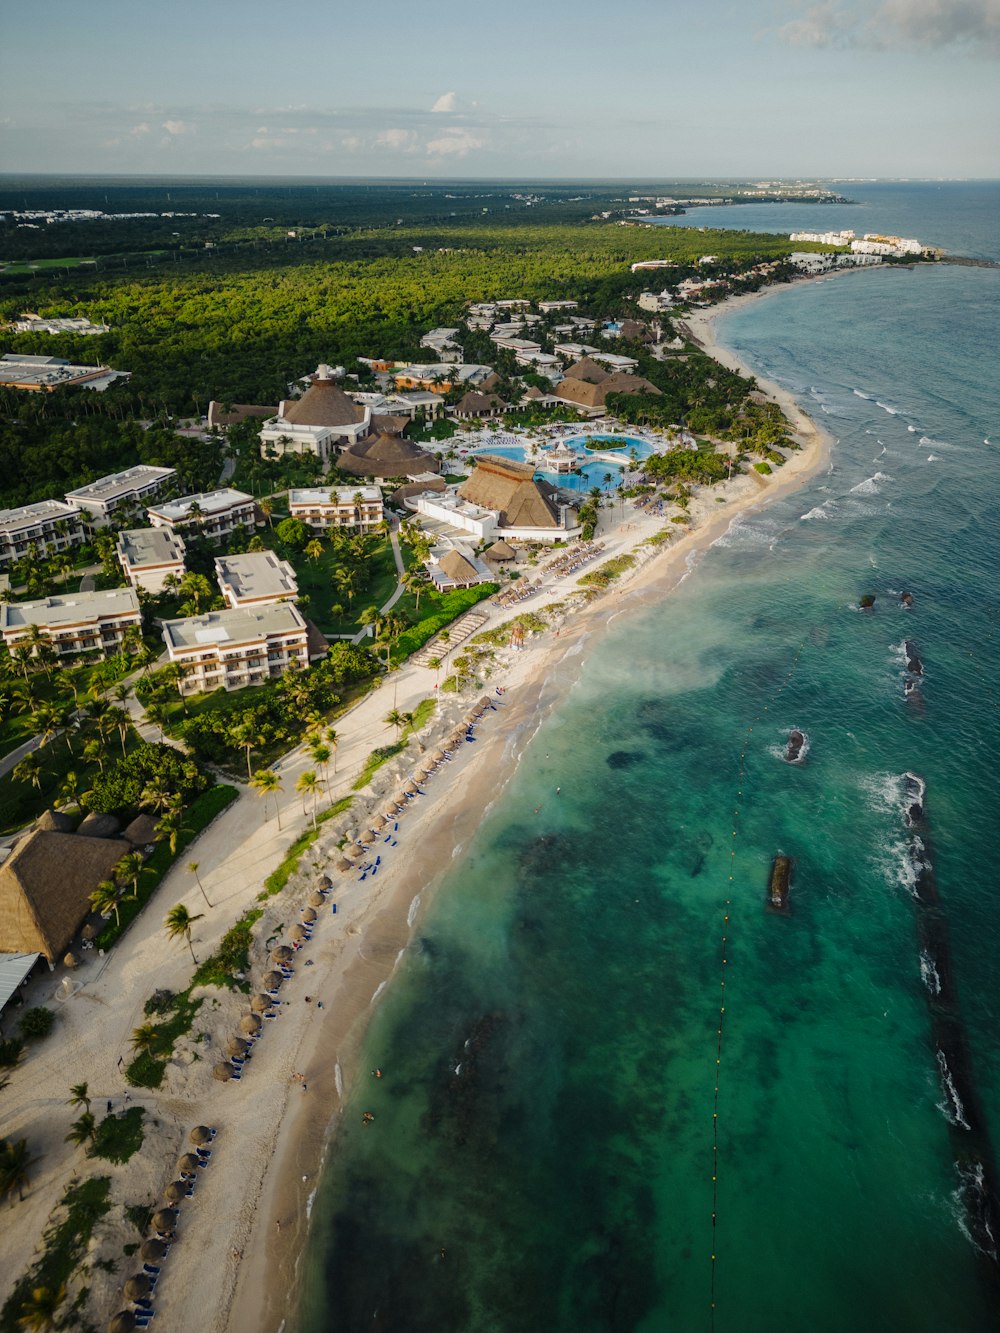 an aerial view of a resort and beach